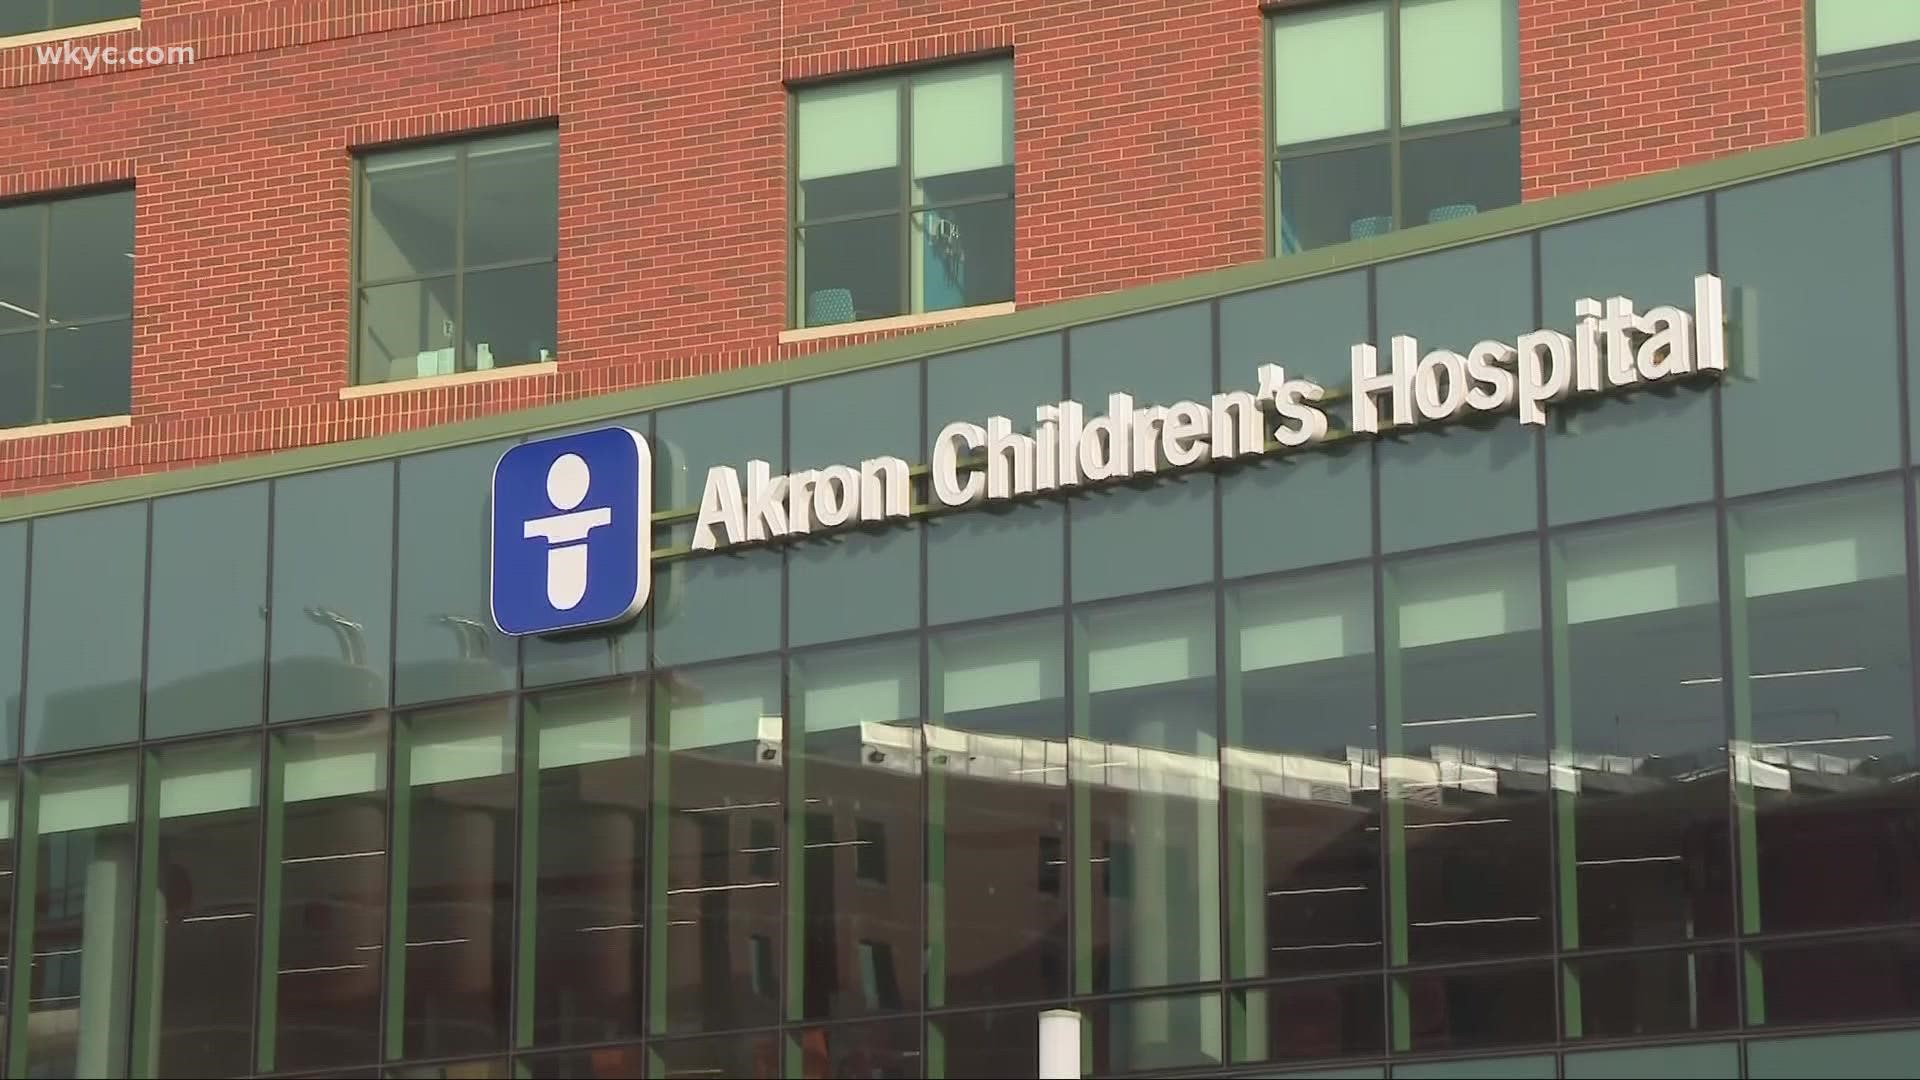 Unvaccinated employees without exemptions were put on unpaid administrative leave by Akron Children's Hospital. Some believe this violates their rights.